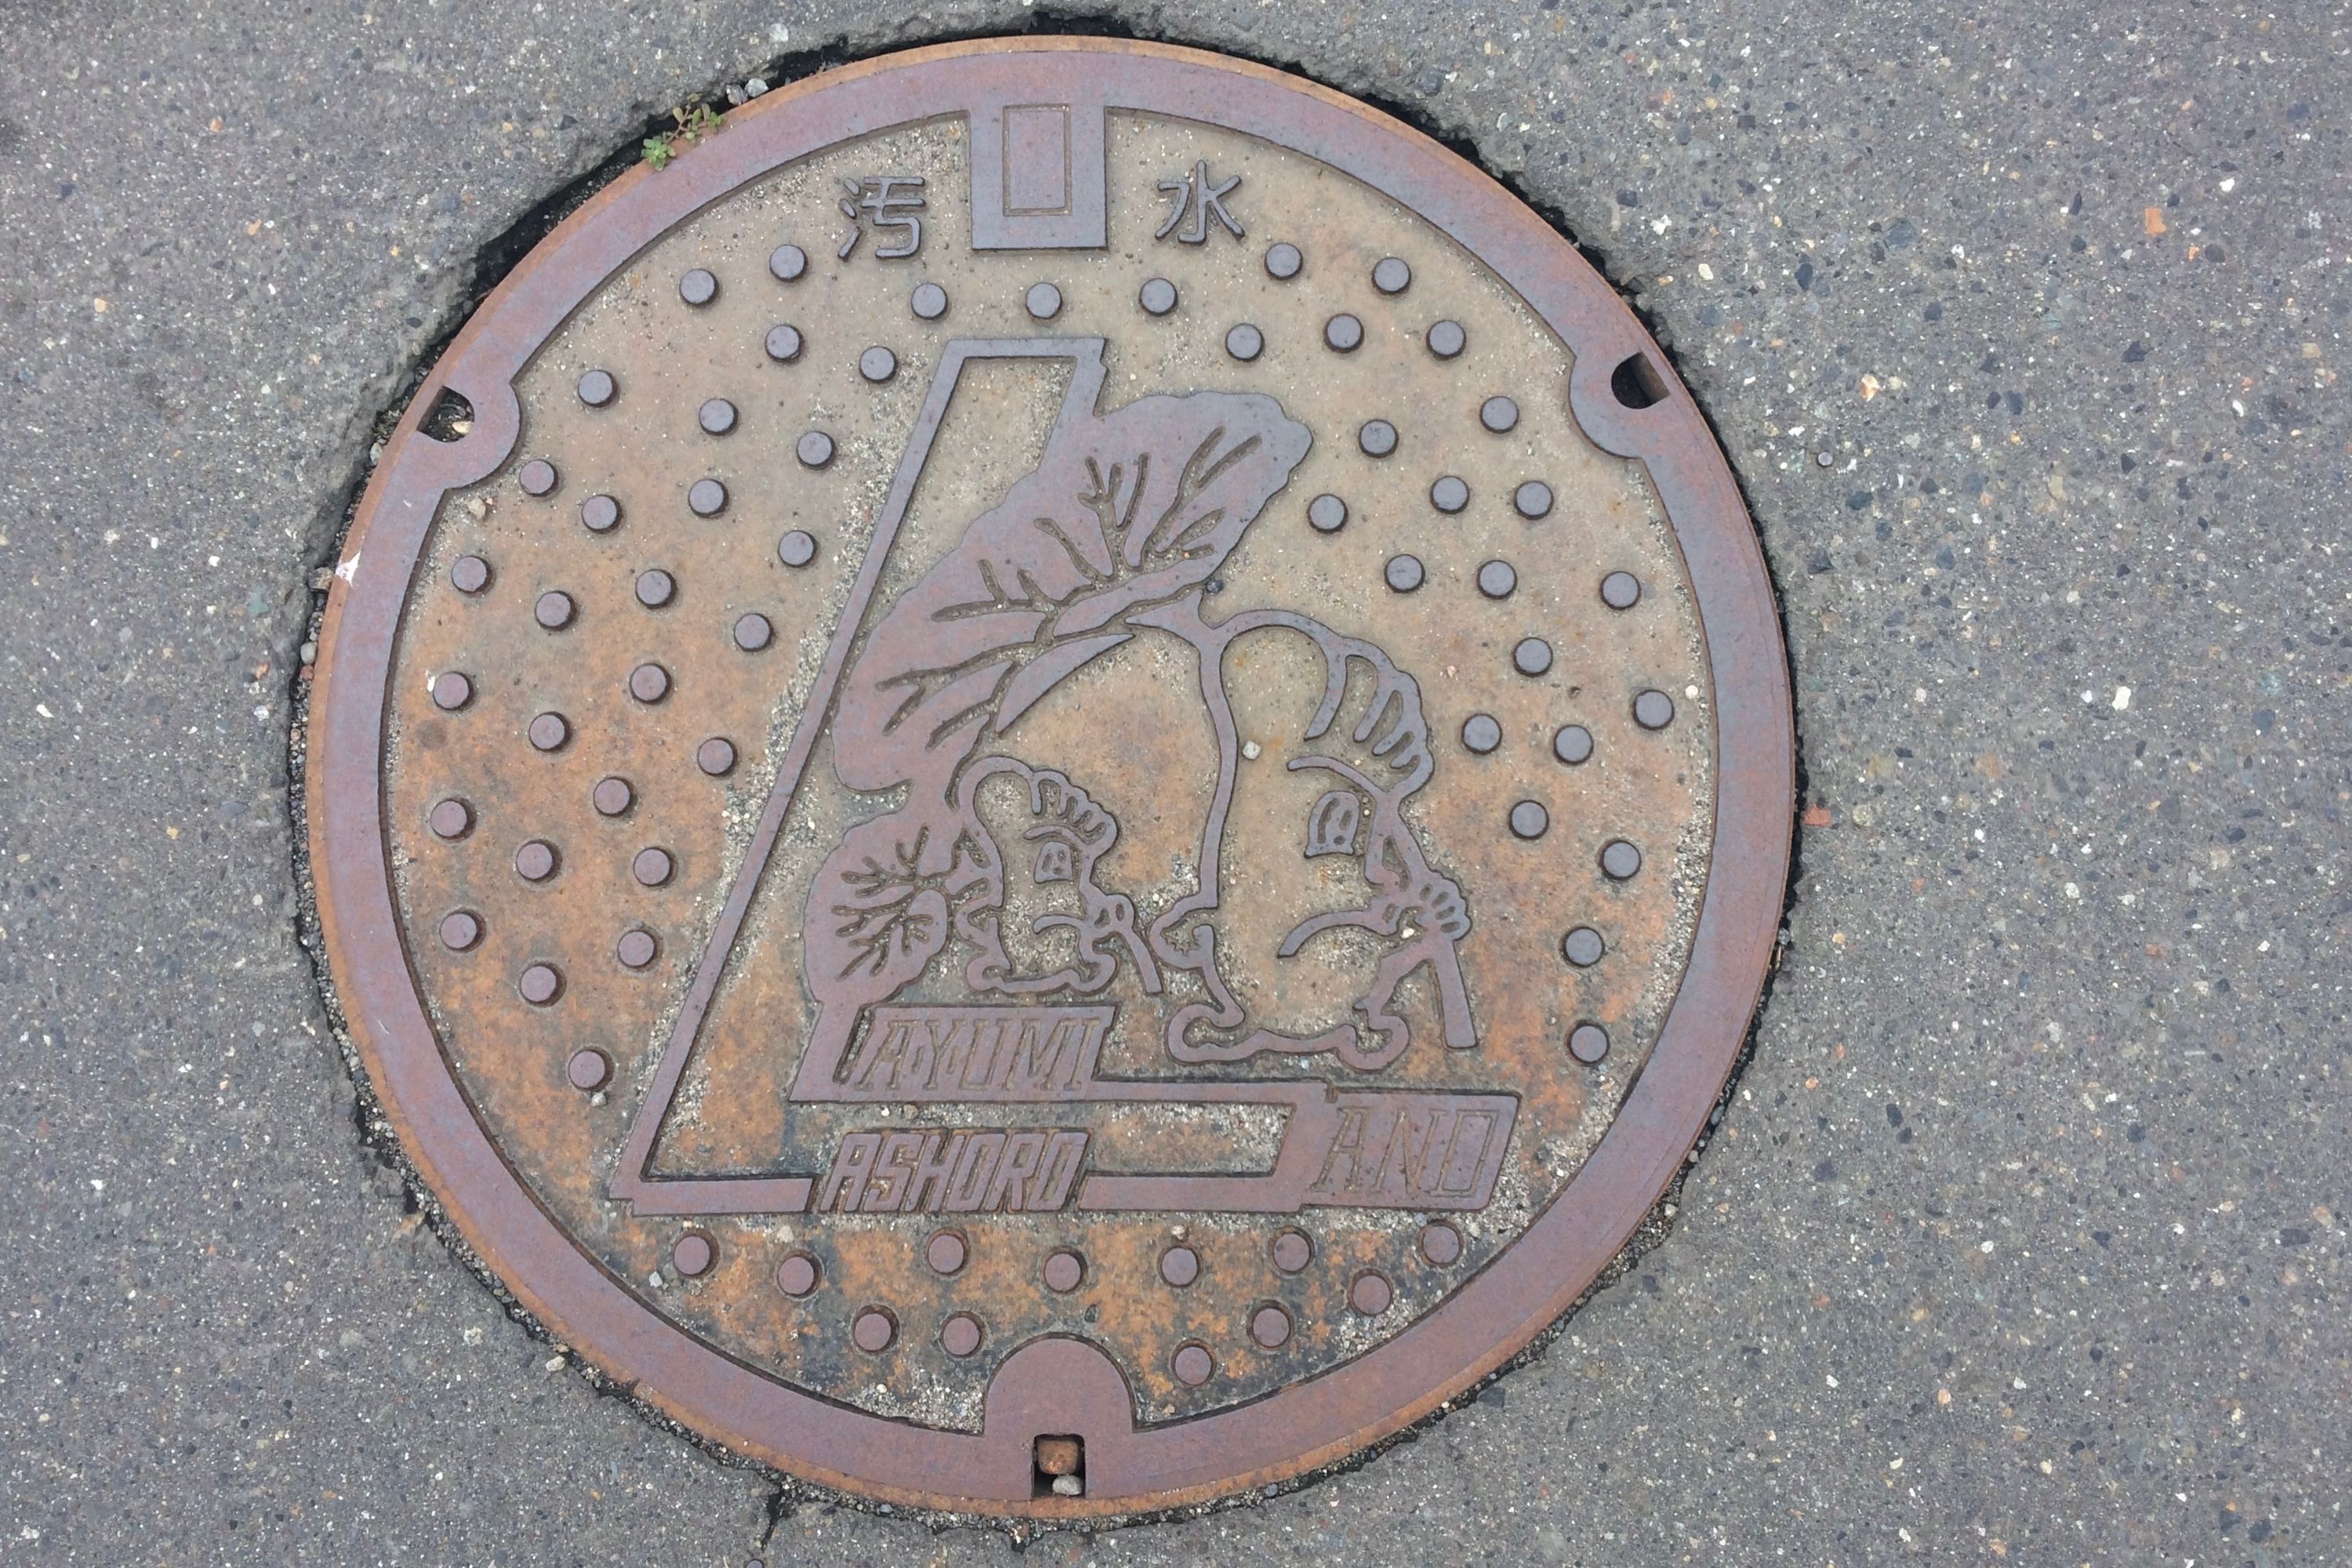 A manhole cover decorated with two large feet holding large leaves.